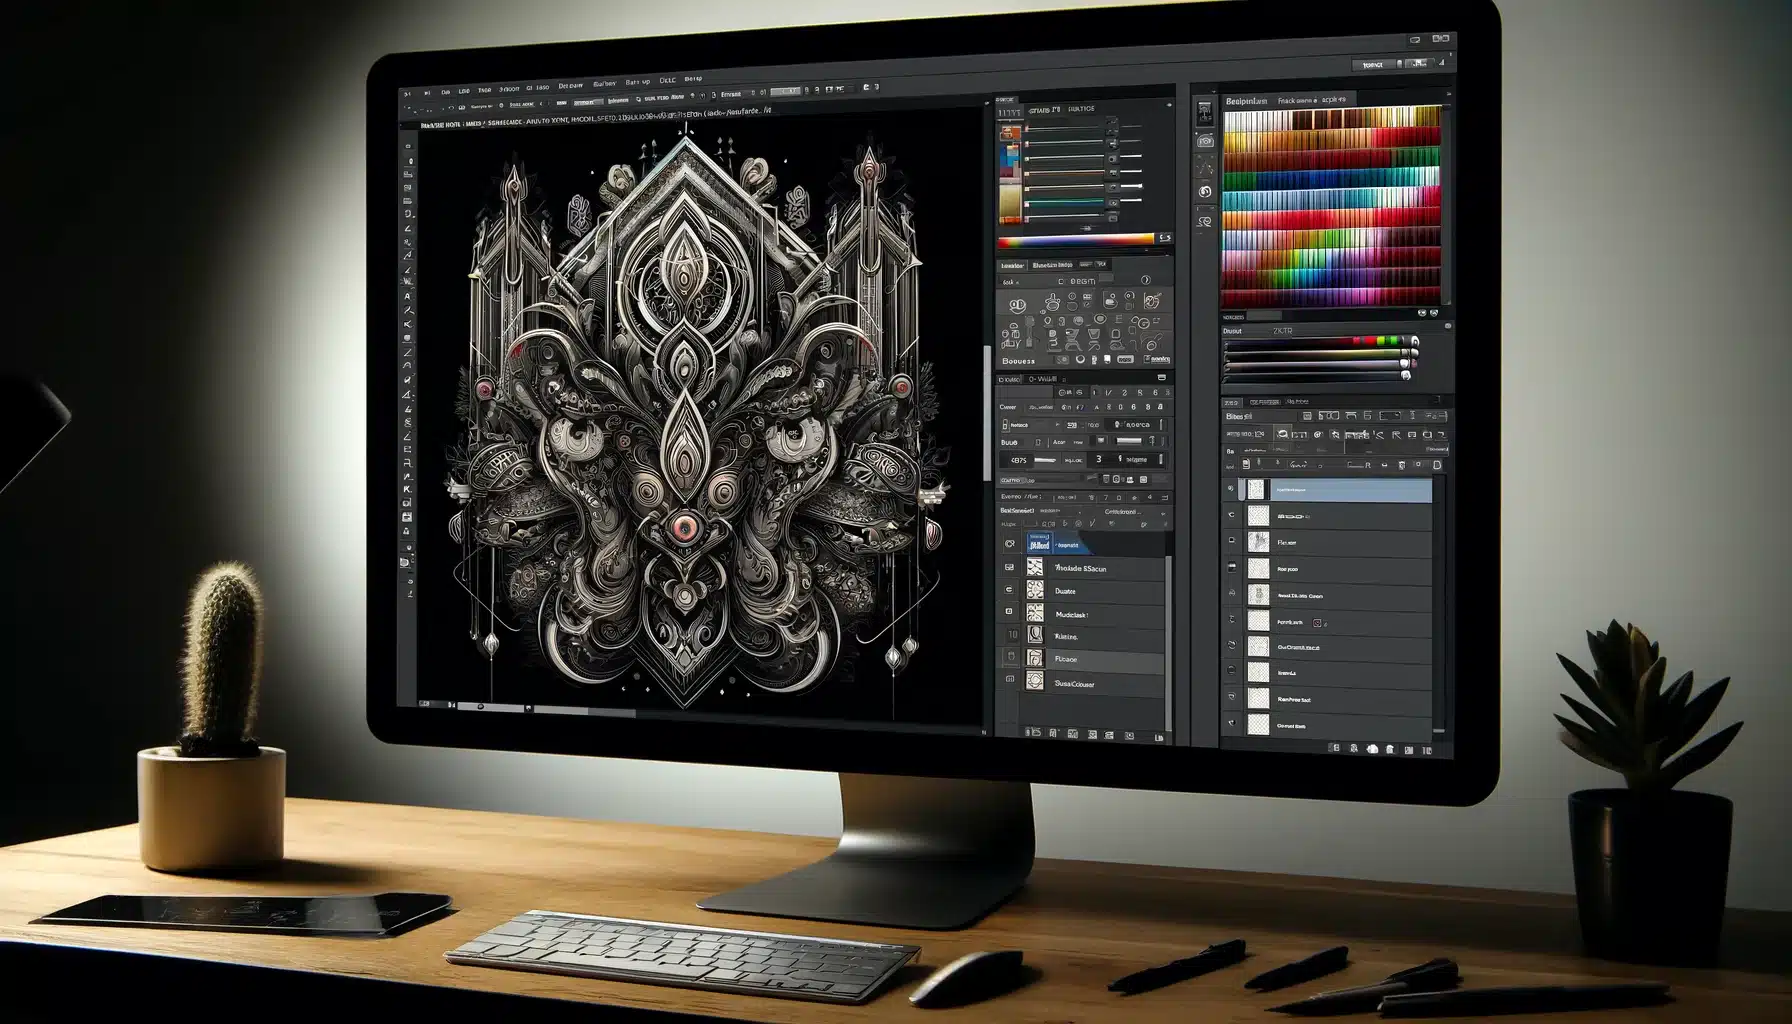 Adobe Photoshop interface showcasing advanced graphic design with high-resolution editing and complex layers.